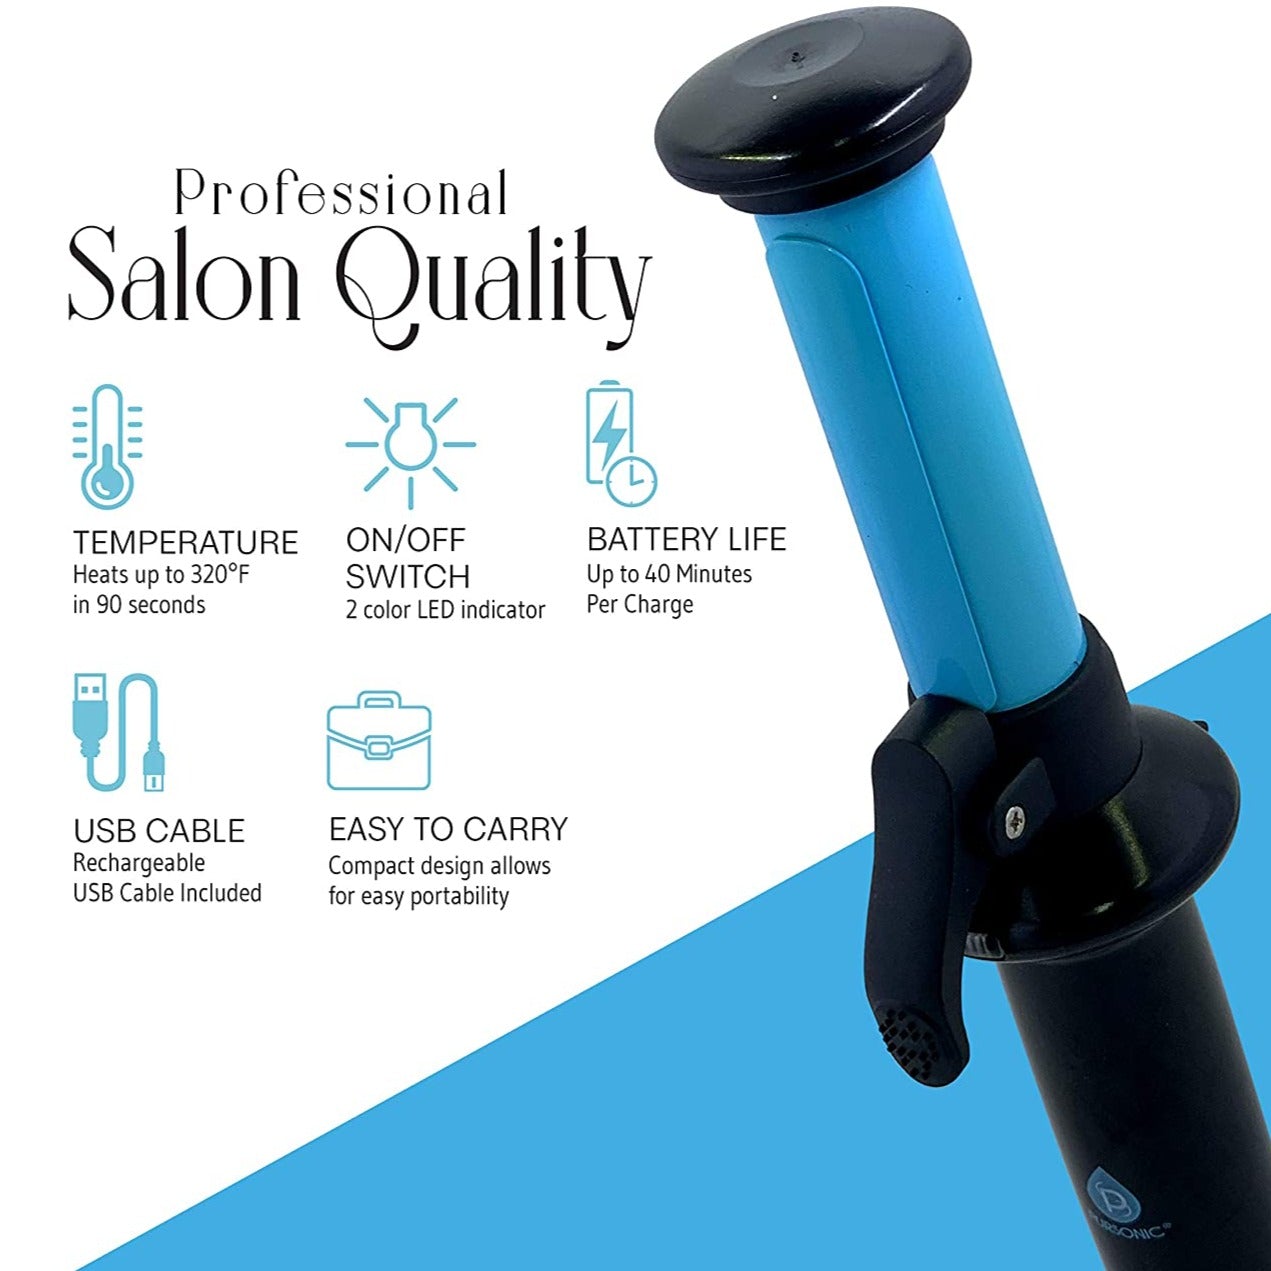 Portable Cordless Professional Salon Quality Rechargeable USB Curling Iron | Charge Up To 40 minutes Of Use - Home Decor Gifts and More